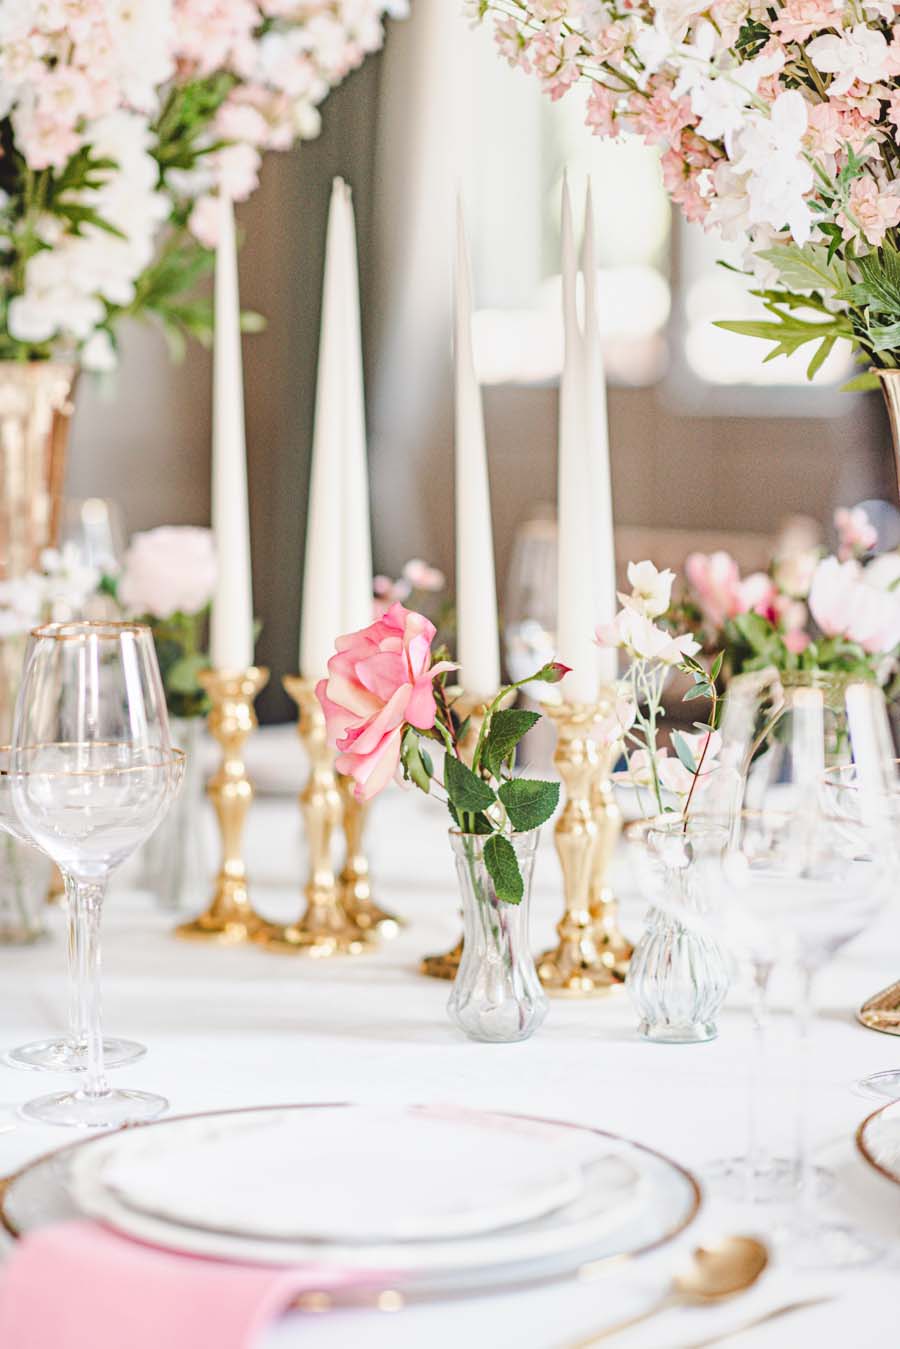 Under The Floral Spell Wedding Décor Inspiration at Wotton House, Surrey